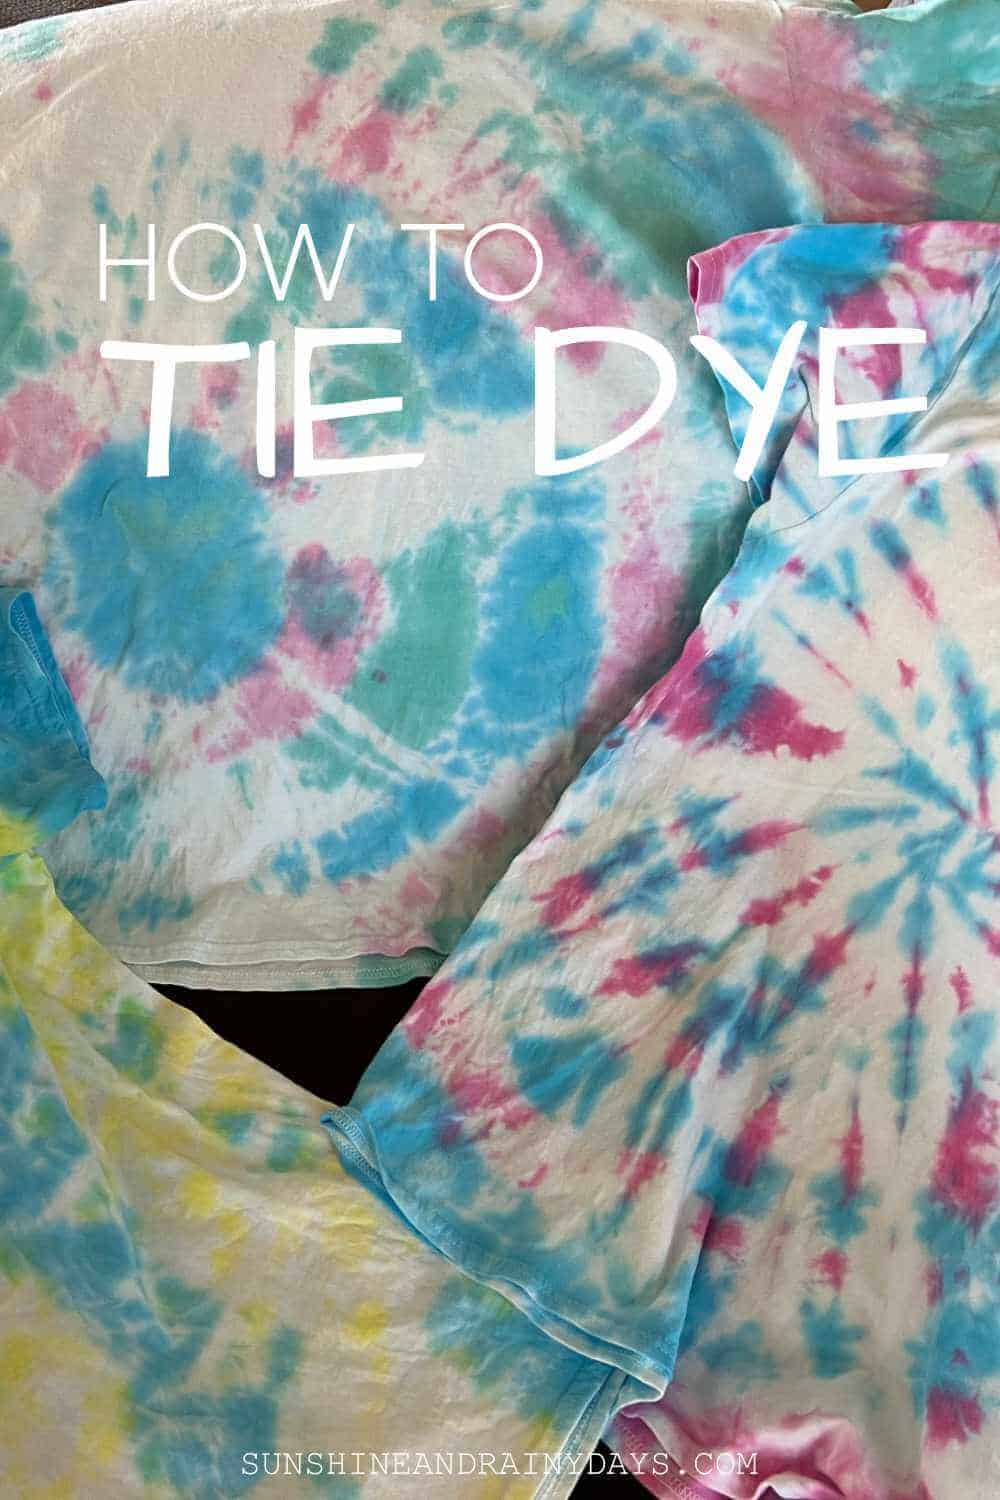 How to host tie-dye party supplies needed